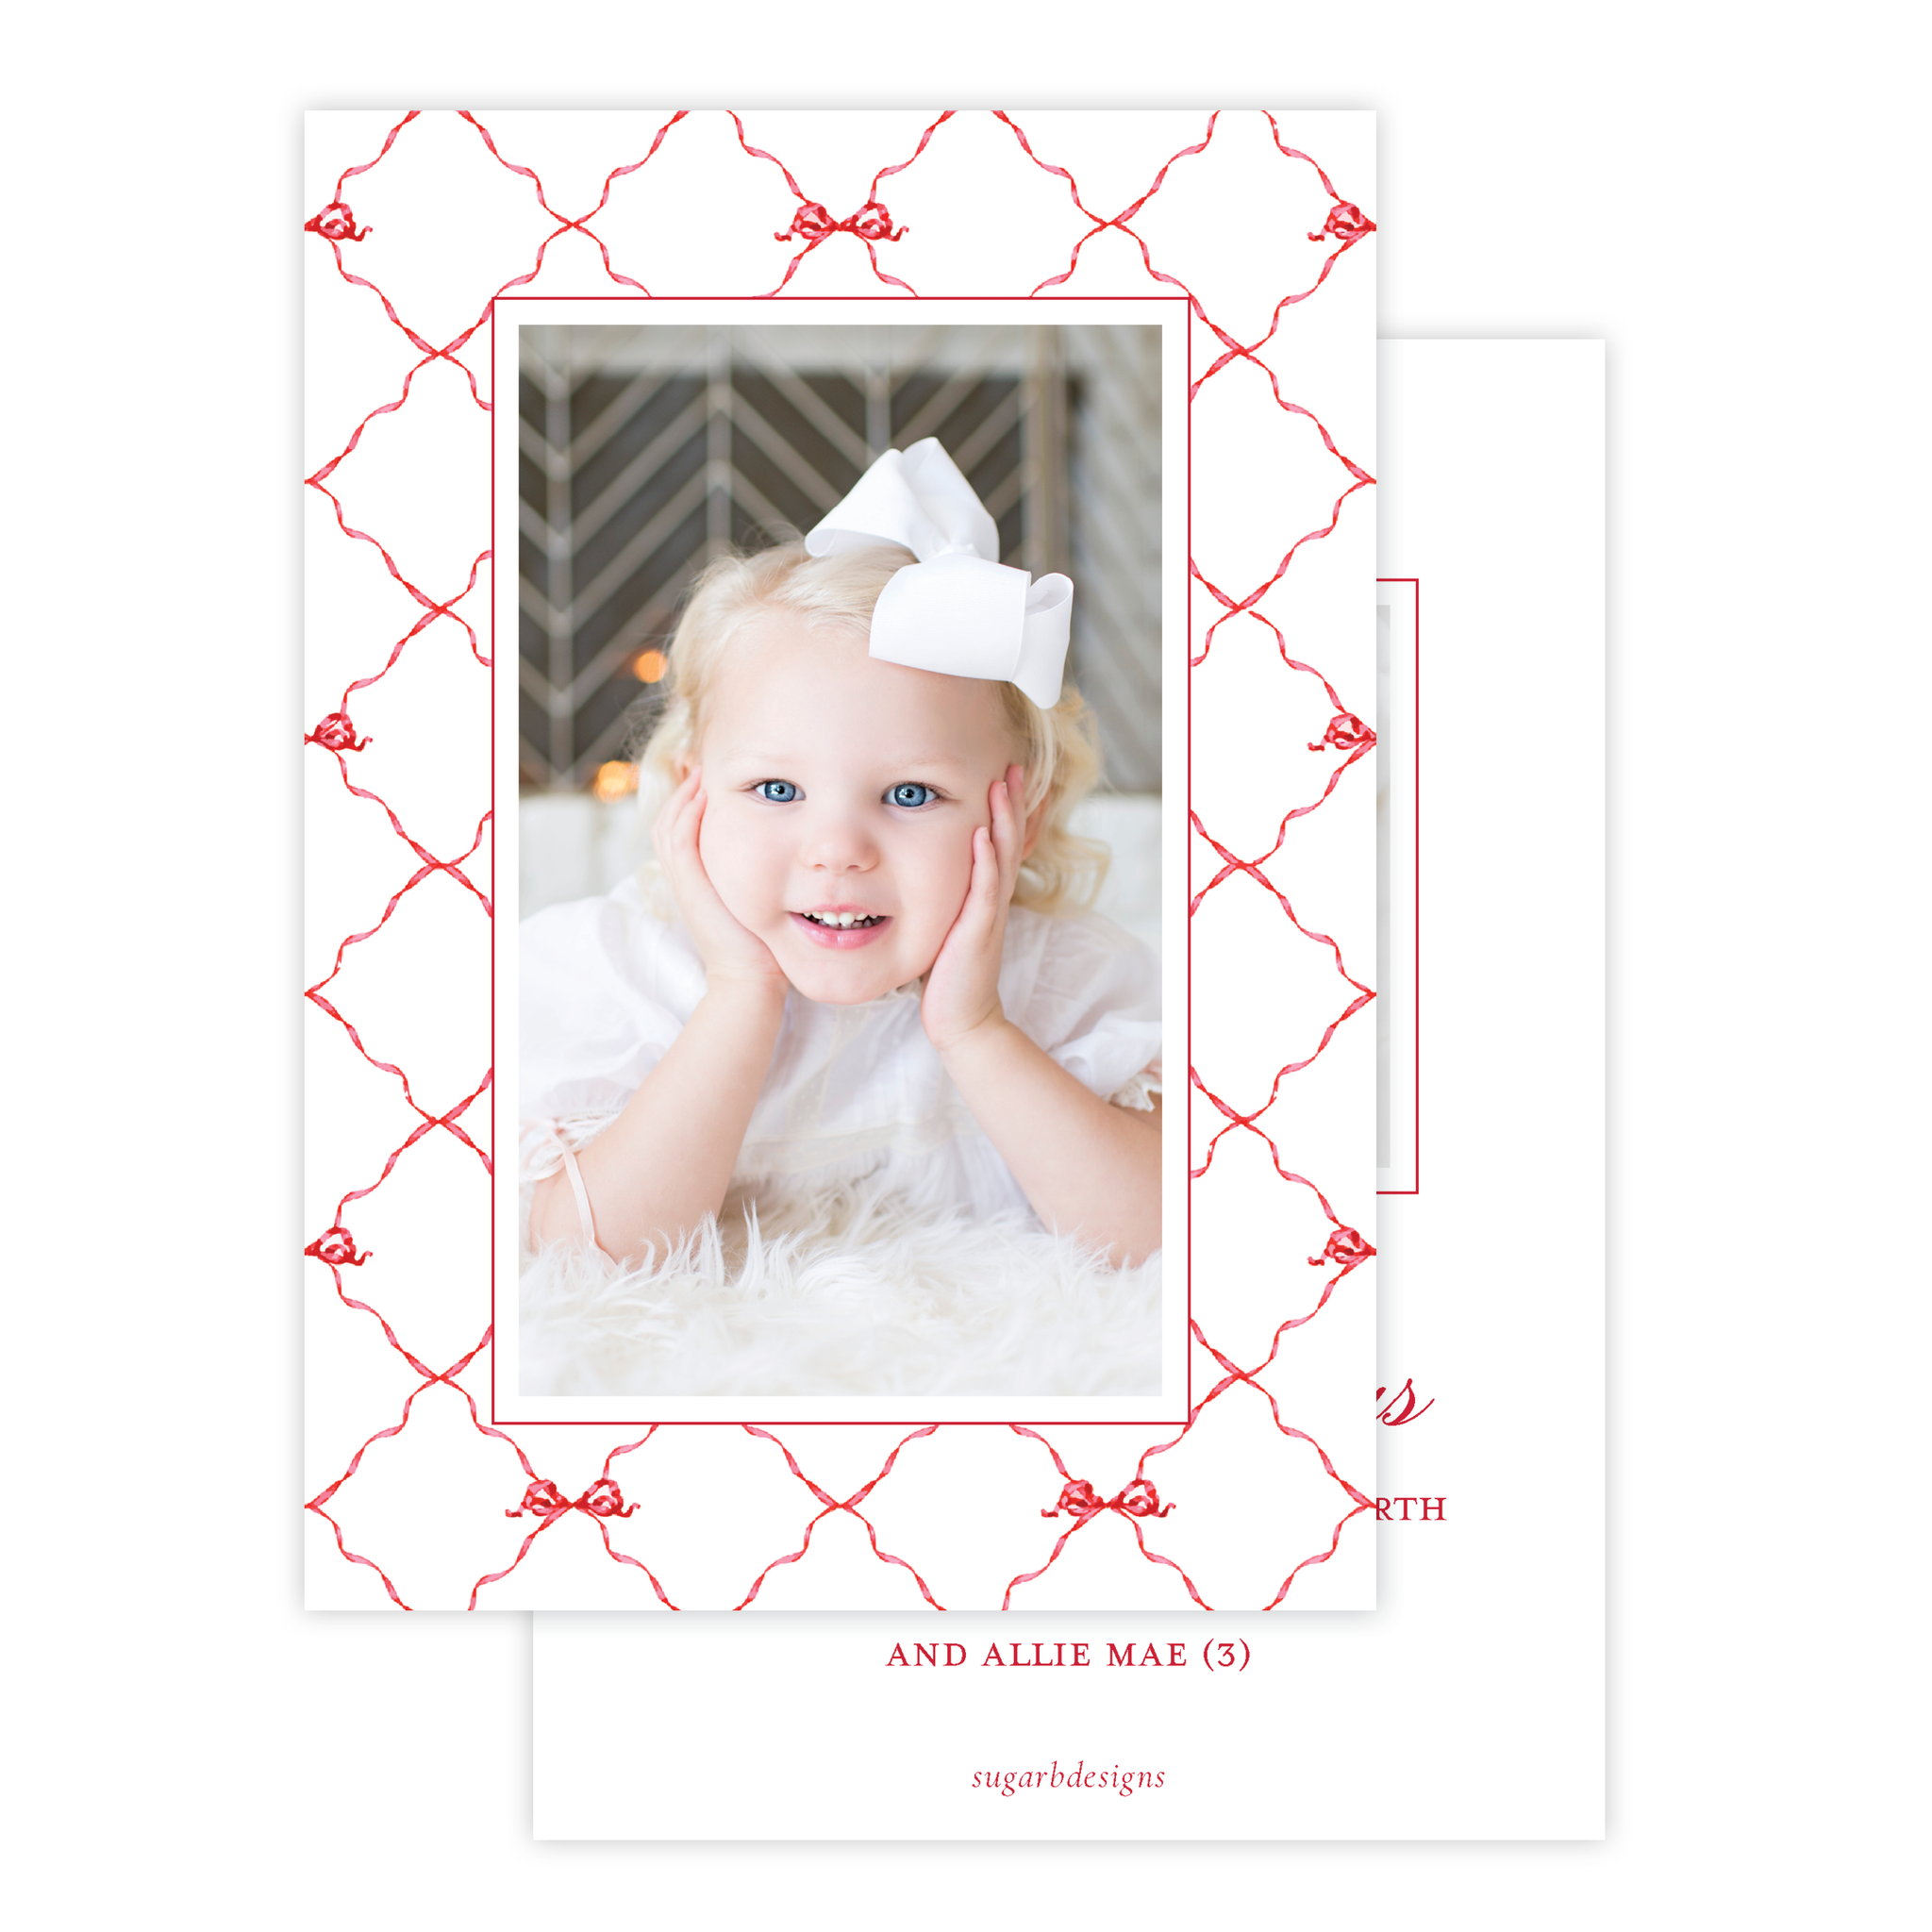 Banner Ribbon in Red Christmas Card